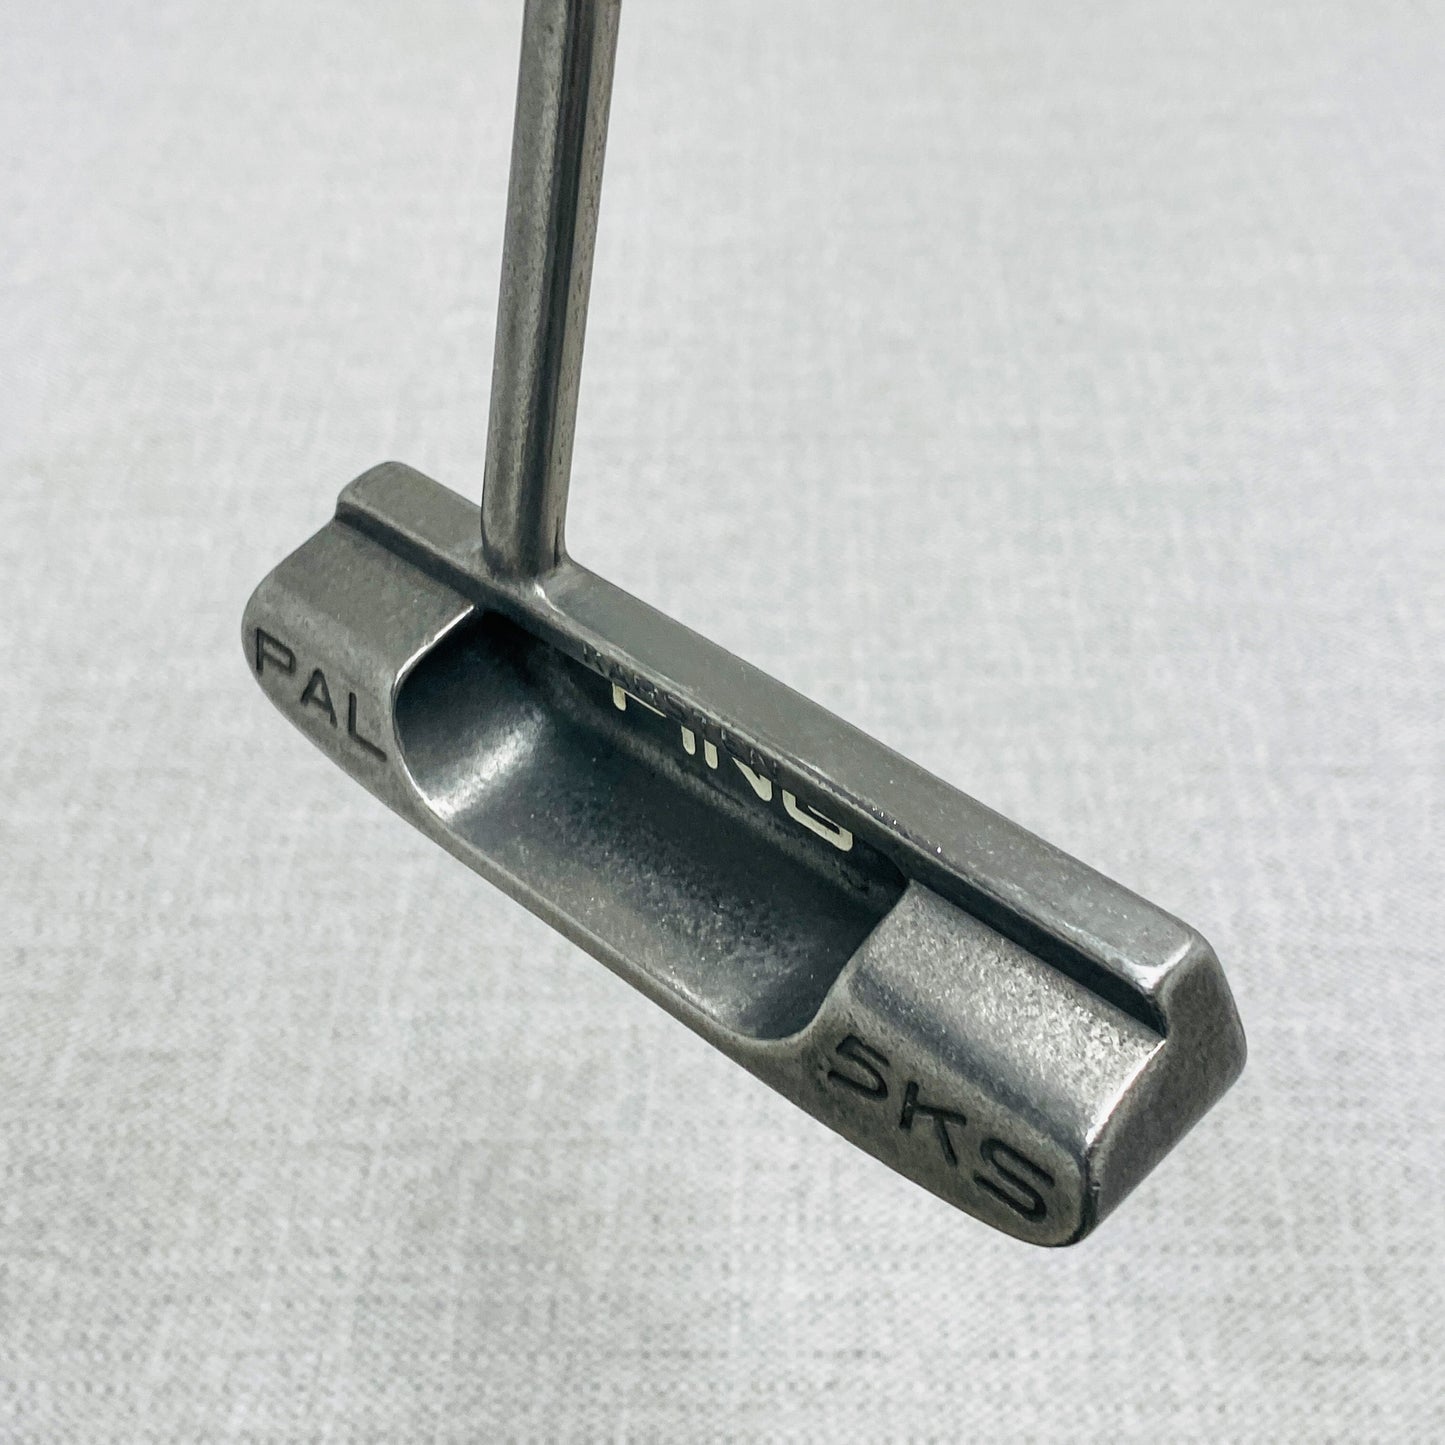 PING Pal 5KS Stainless Putter. 36 inch - Very Good Condition # T1014